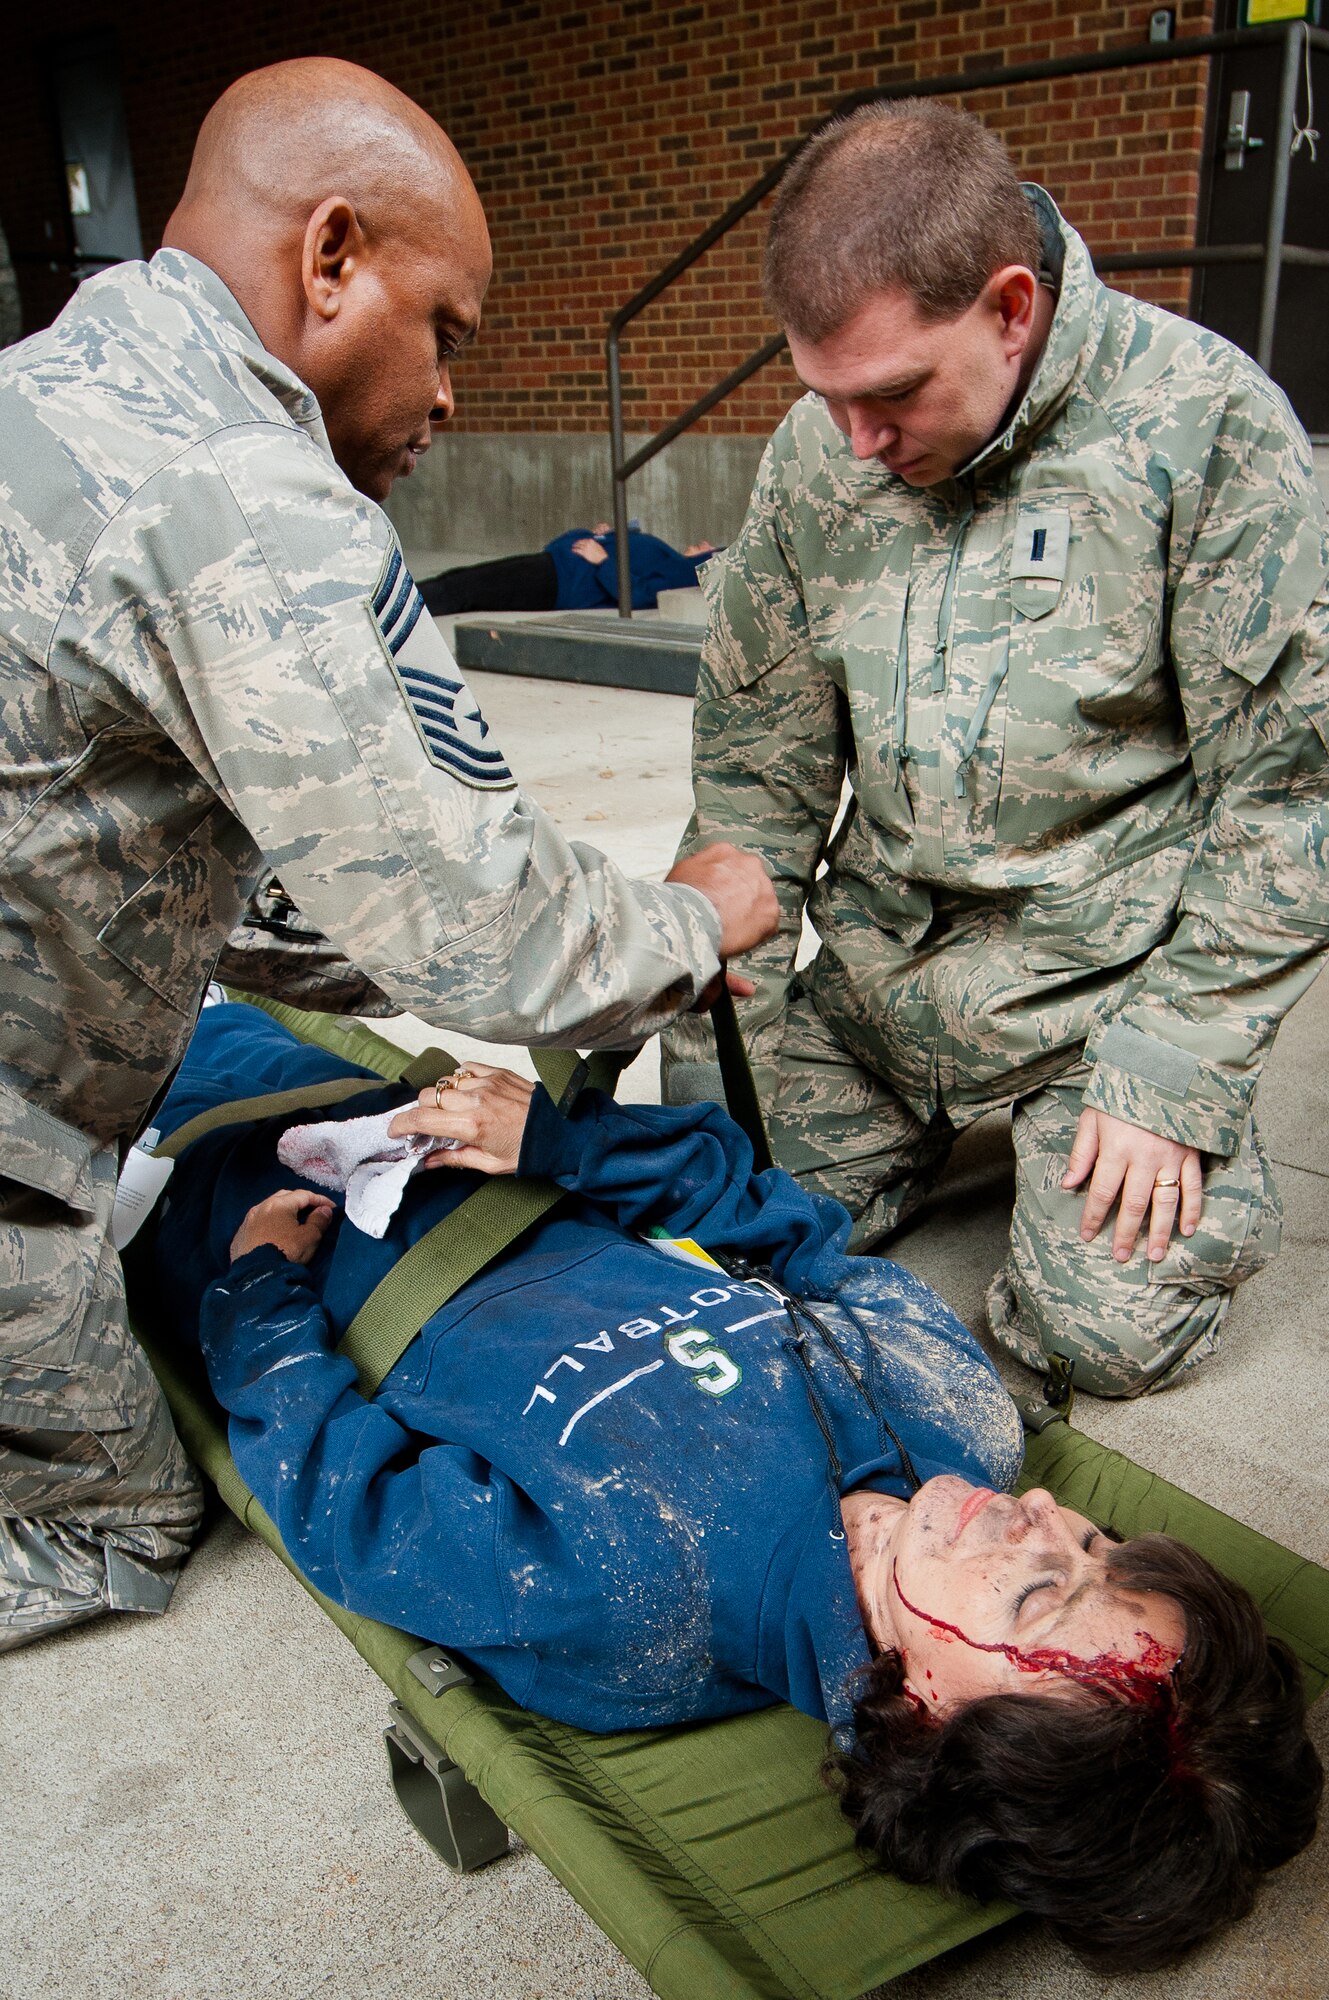 Chief Master Sgt. Jimmy Rogers (left) and 1st Lt. Thomas Hagan of the Kentucky Air National Guard’s 123rd Medical Group examine a simulated plane-crash victim during earthquake-response exercises held May 18, 2011, at the Kentucky Air National Guard Base in Louisville, Ky. The exercises were designed to test the ability of the Department of Veterans Affairs and the Kentucky Air Guard to provide medical care following a major earthquake along the New Madrid fault line. (U.S. Air Force photo by Maj. Dale Greer)